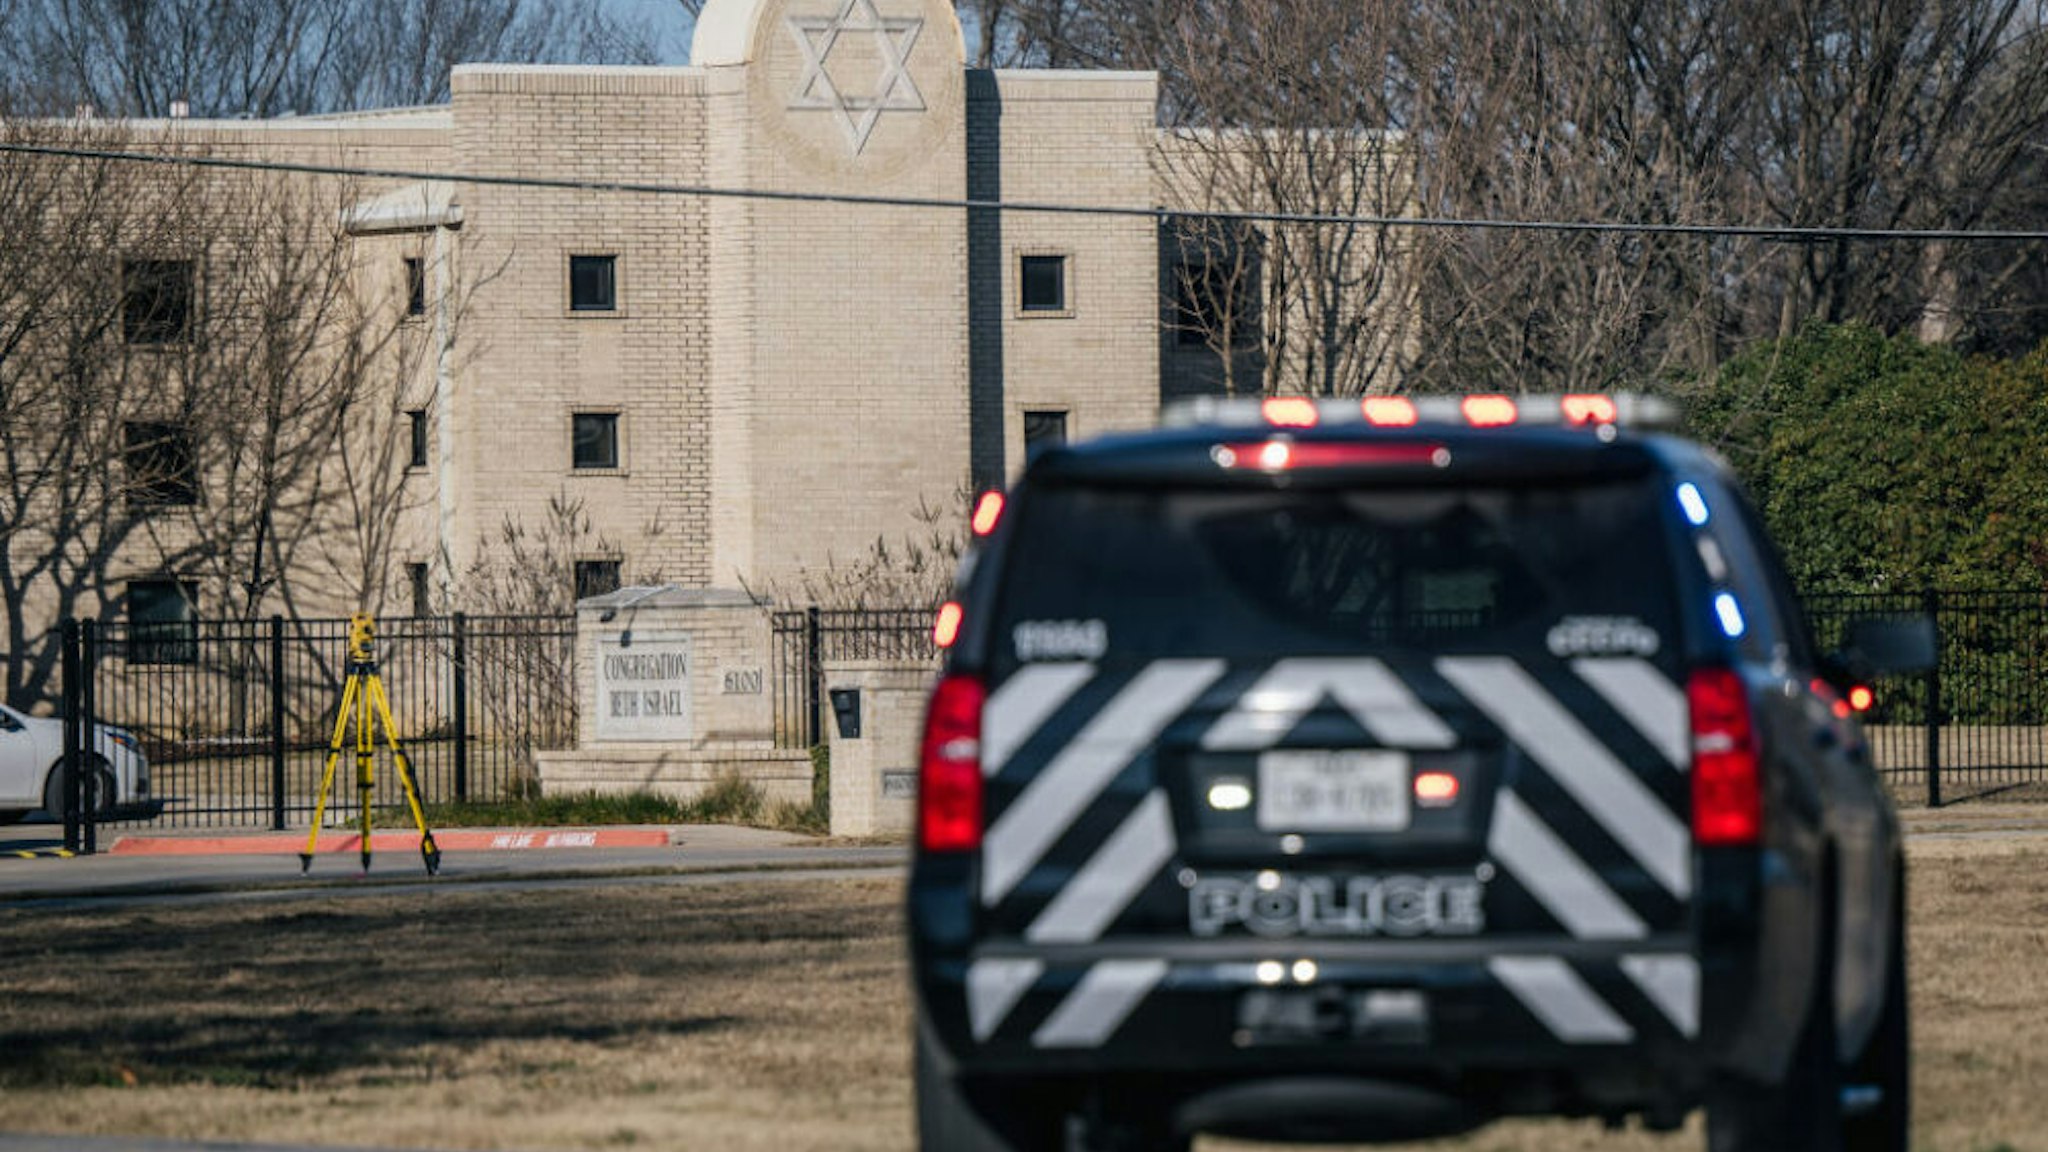 COLLEYVILLE, TEXAS - JANUARY 16: A law enforcement vehicle sits near the Congregation Beth Israel synagogue on January 16, 2022 in Colleyville, Texas. All four people who were held hostage at the Congregation Beth Israel synagogue have been safely released after more than 10 hours of being held captive by a gunman. Yesterday, police responded to a hostage situation after reports of a man with a gun was holding people captive.